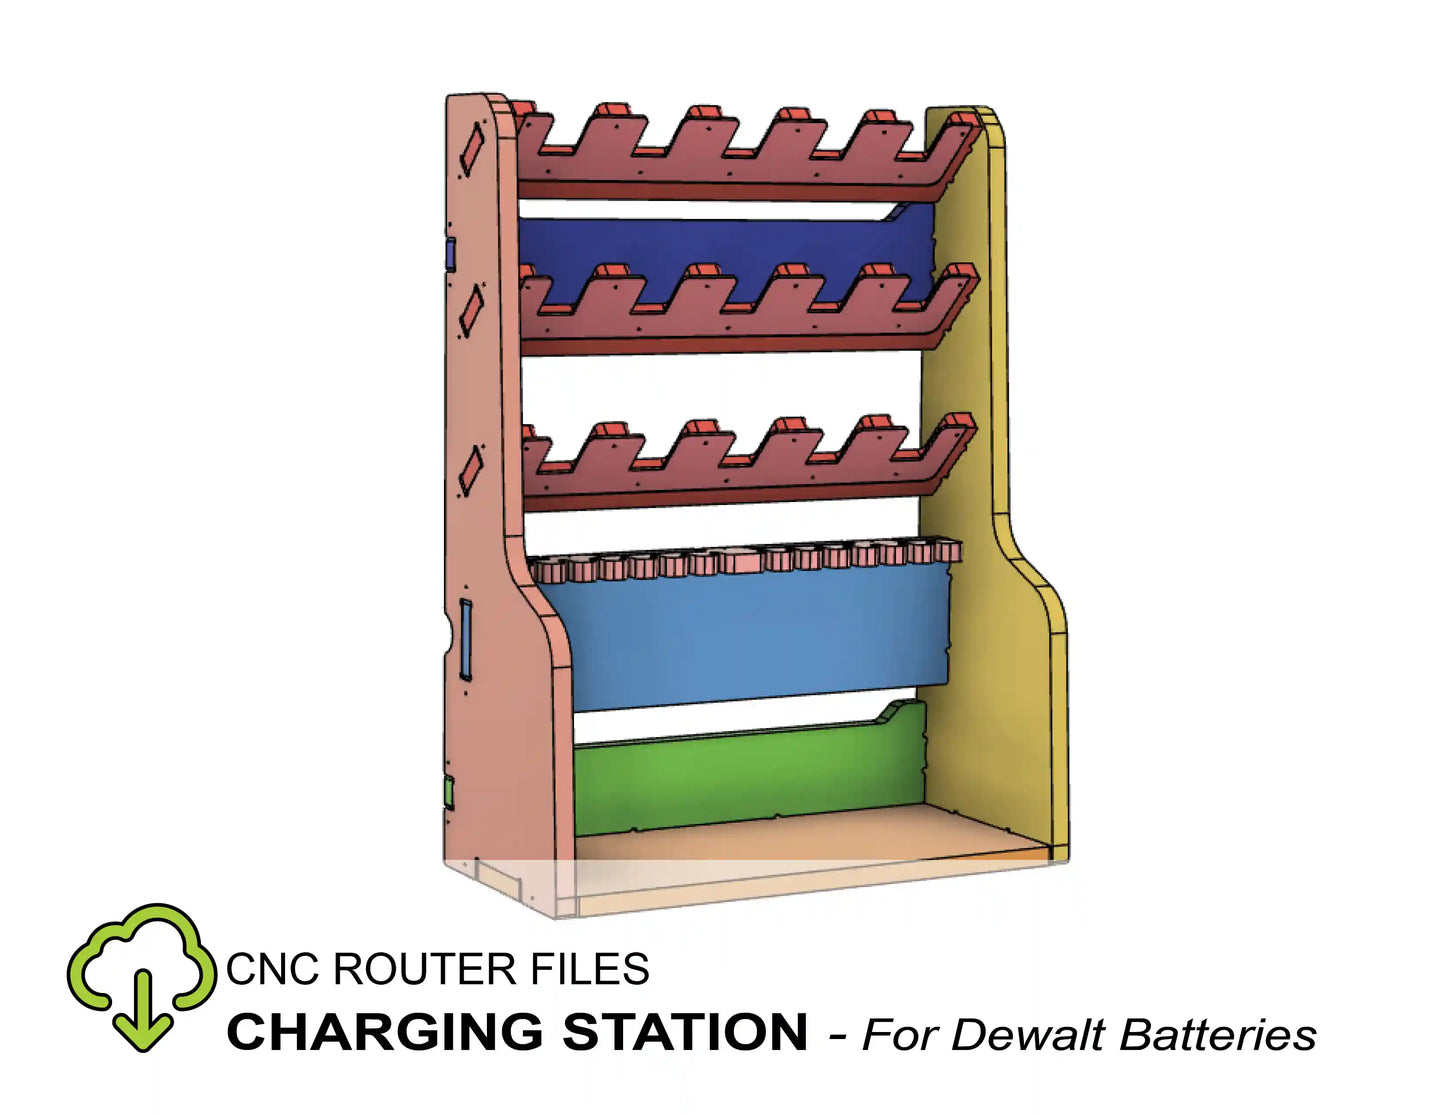 dewalt battery charging station cnc router project file for building a wall mounted battery holder with chargers